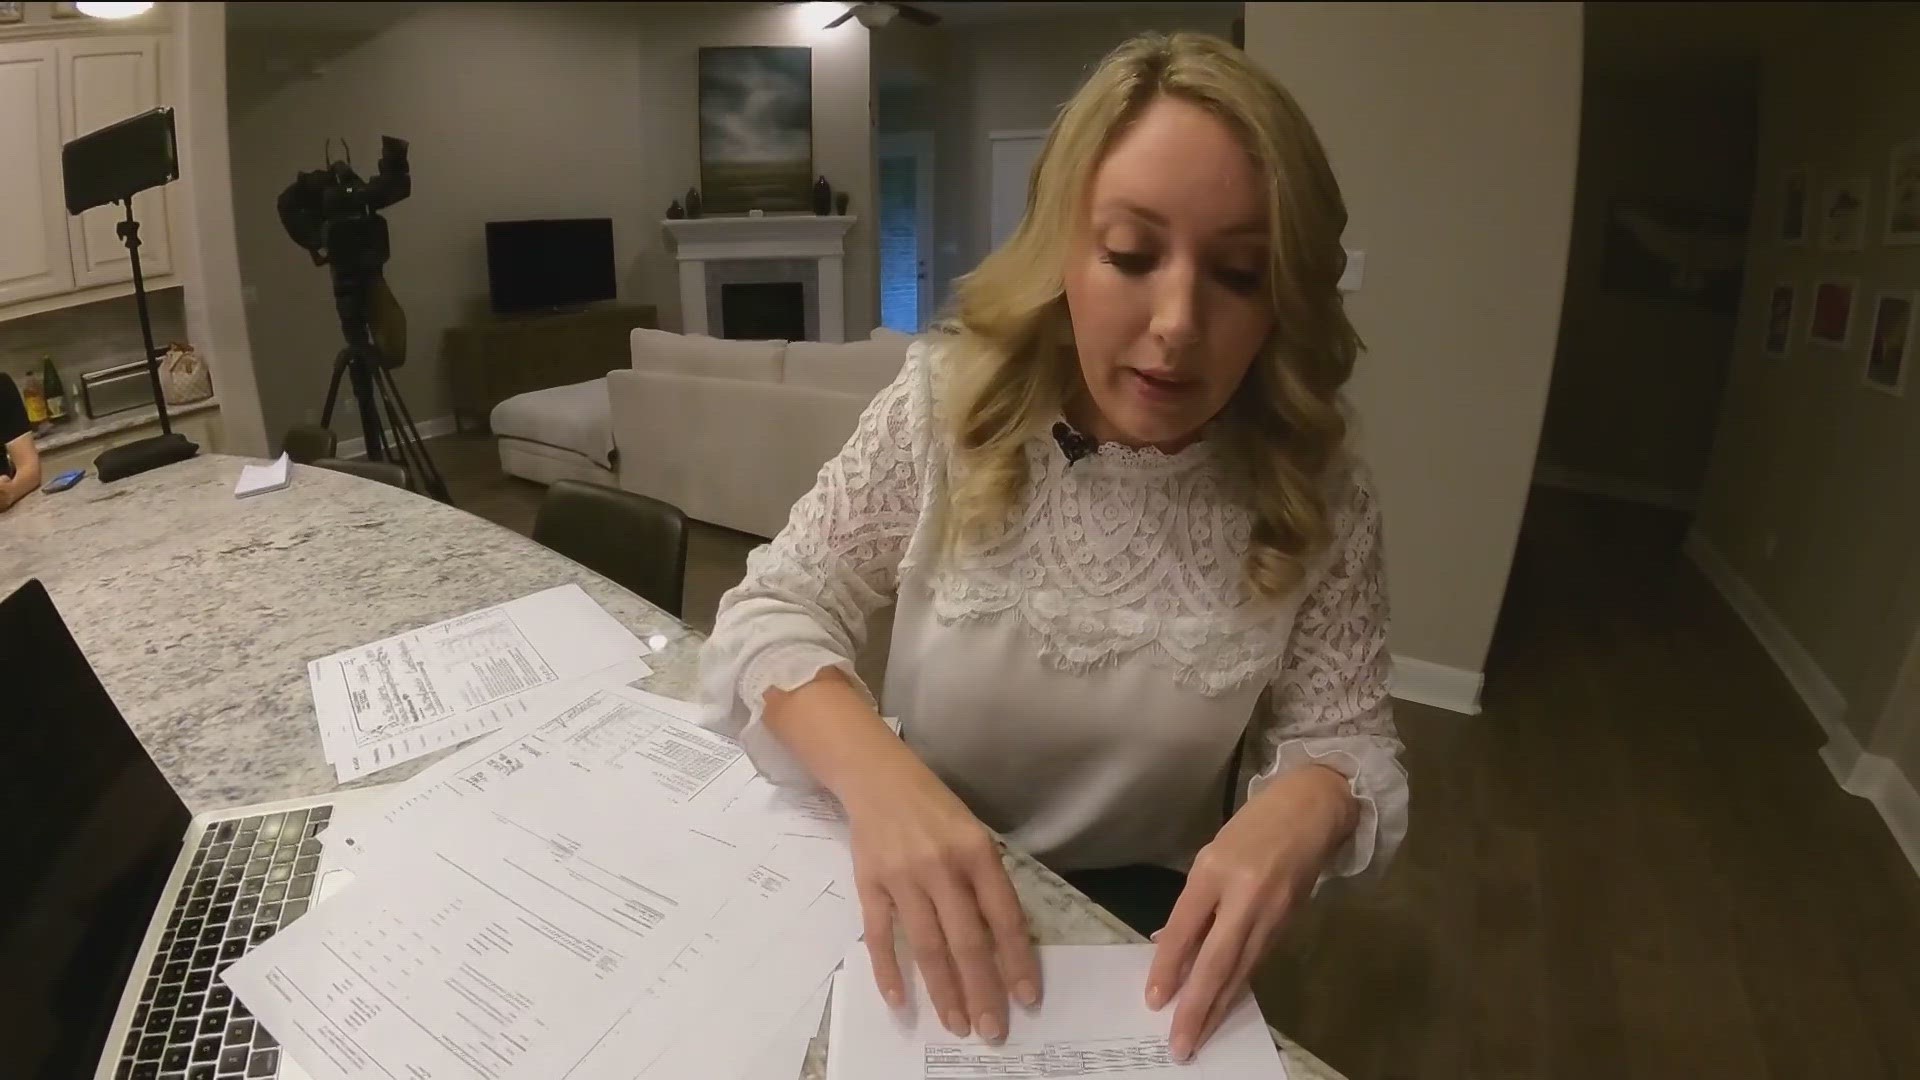 Homebuyers are now facing more favorable conditions in the Austin-area real estate market. But one Hays County woman's homebuying experience was upended by fraud.